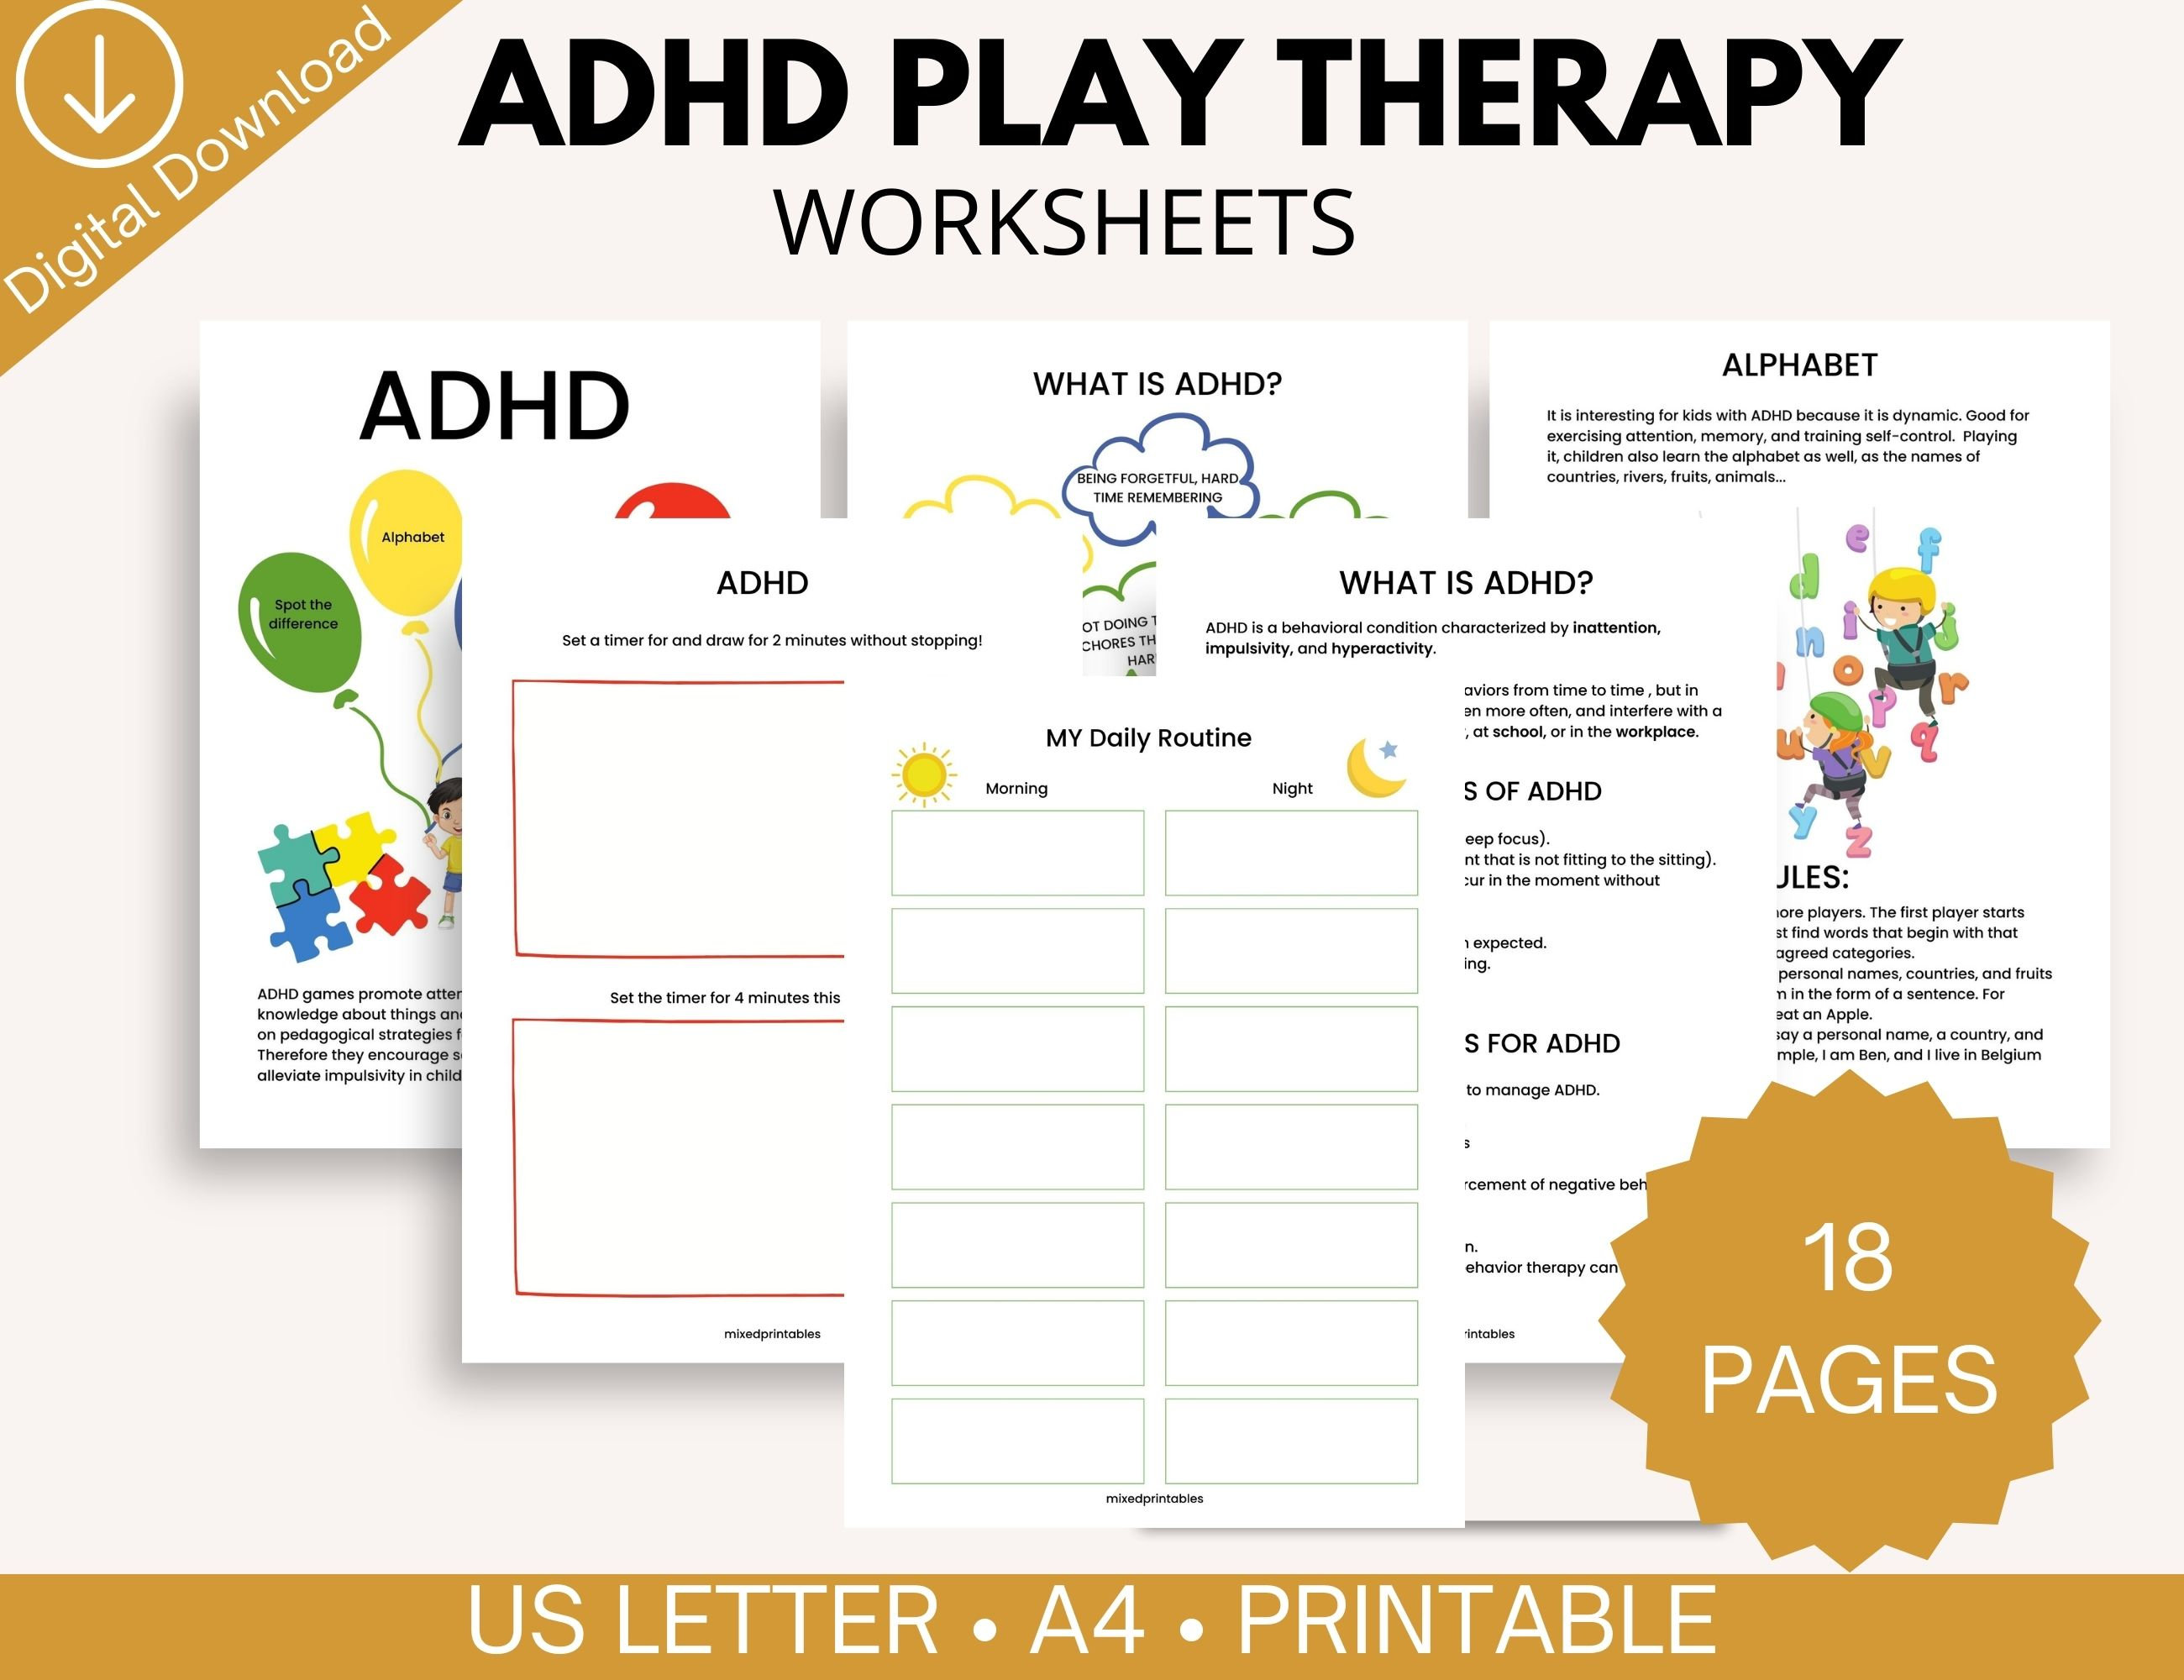 adhd-play-therapy-worksheets-activity-for-kids-mental-health-etsy-israel